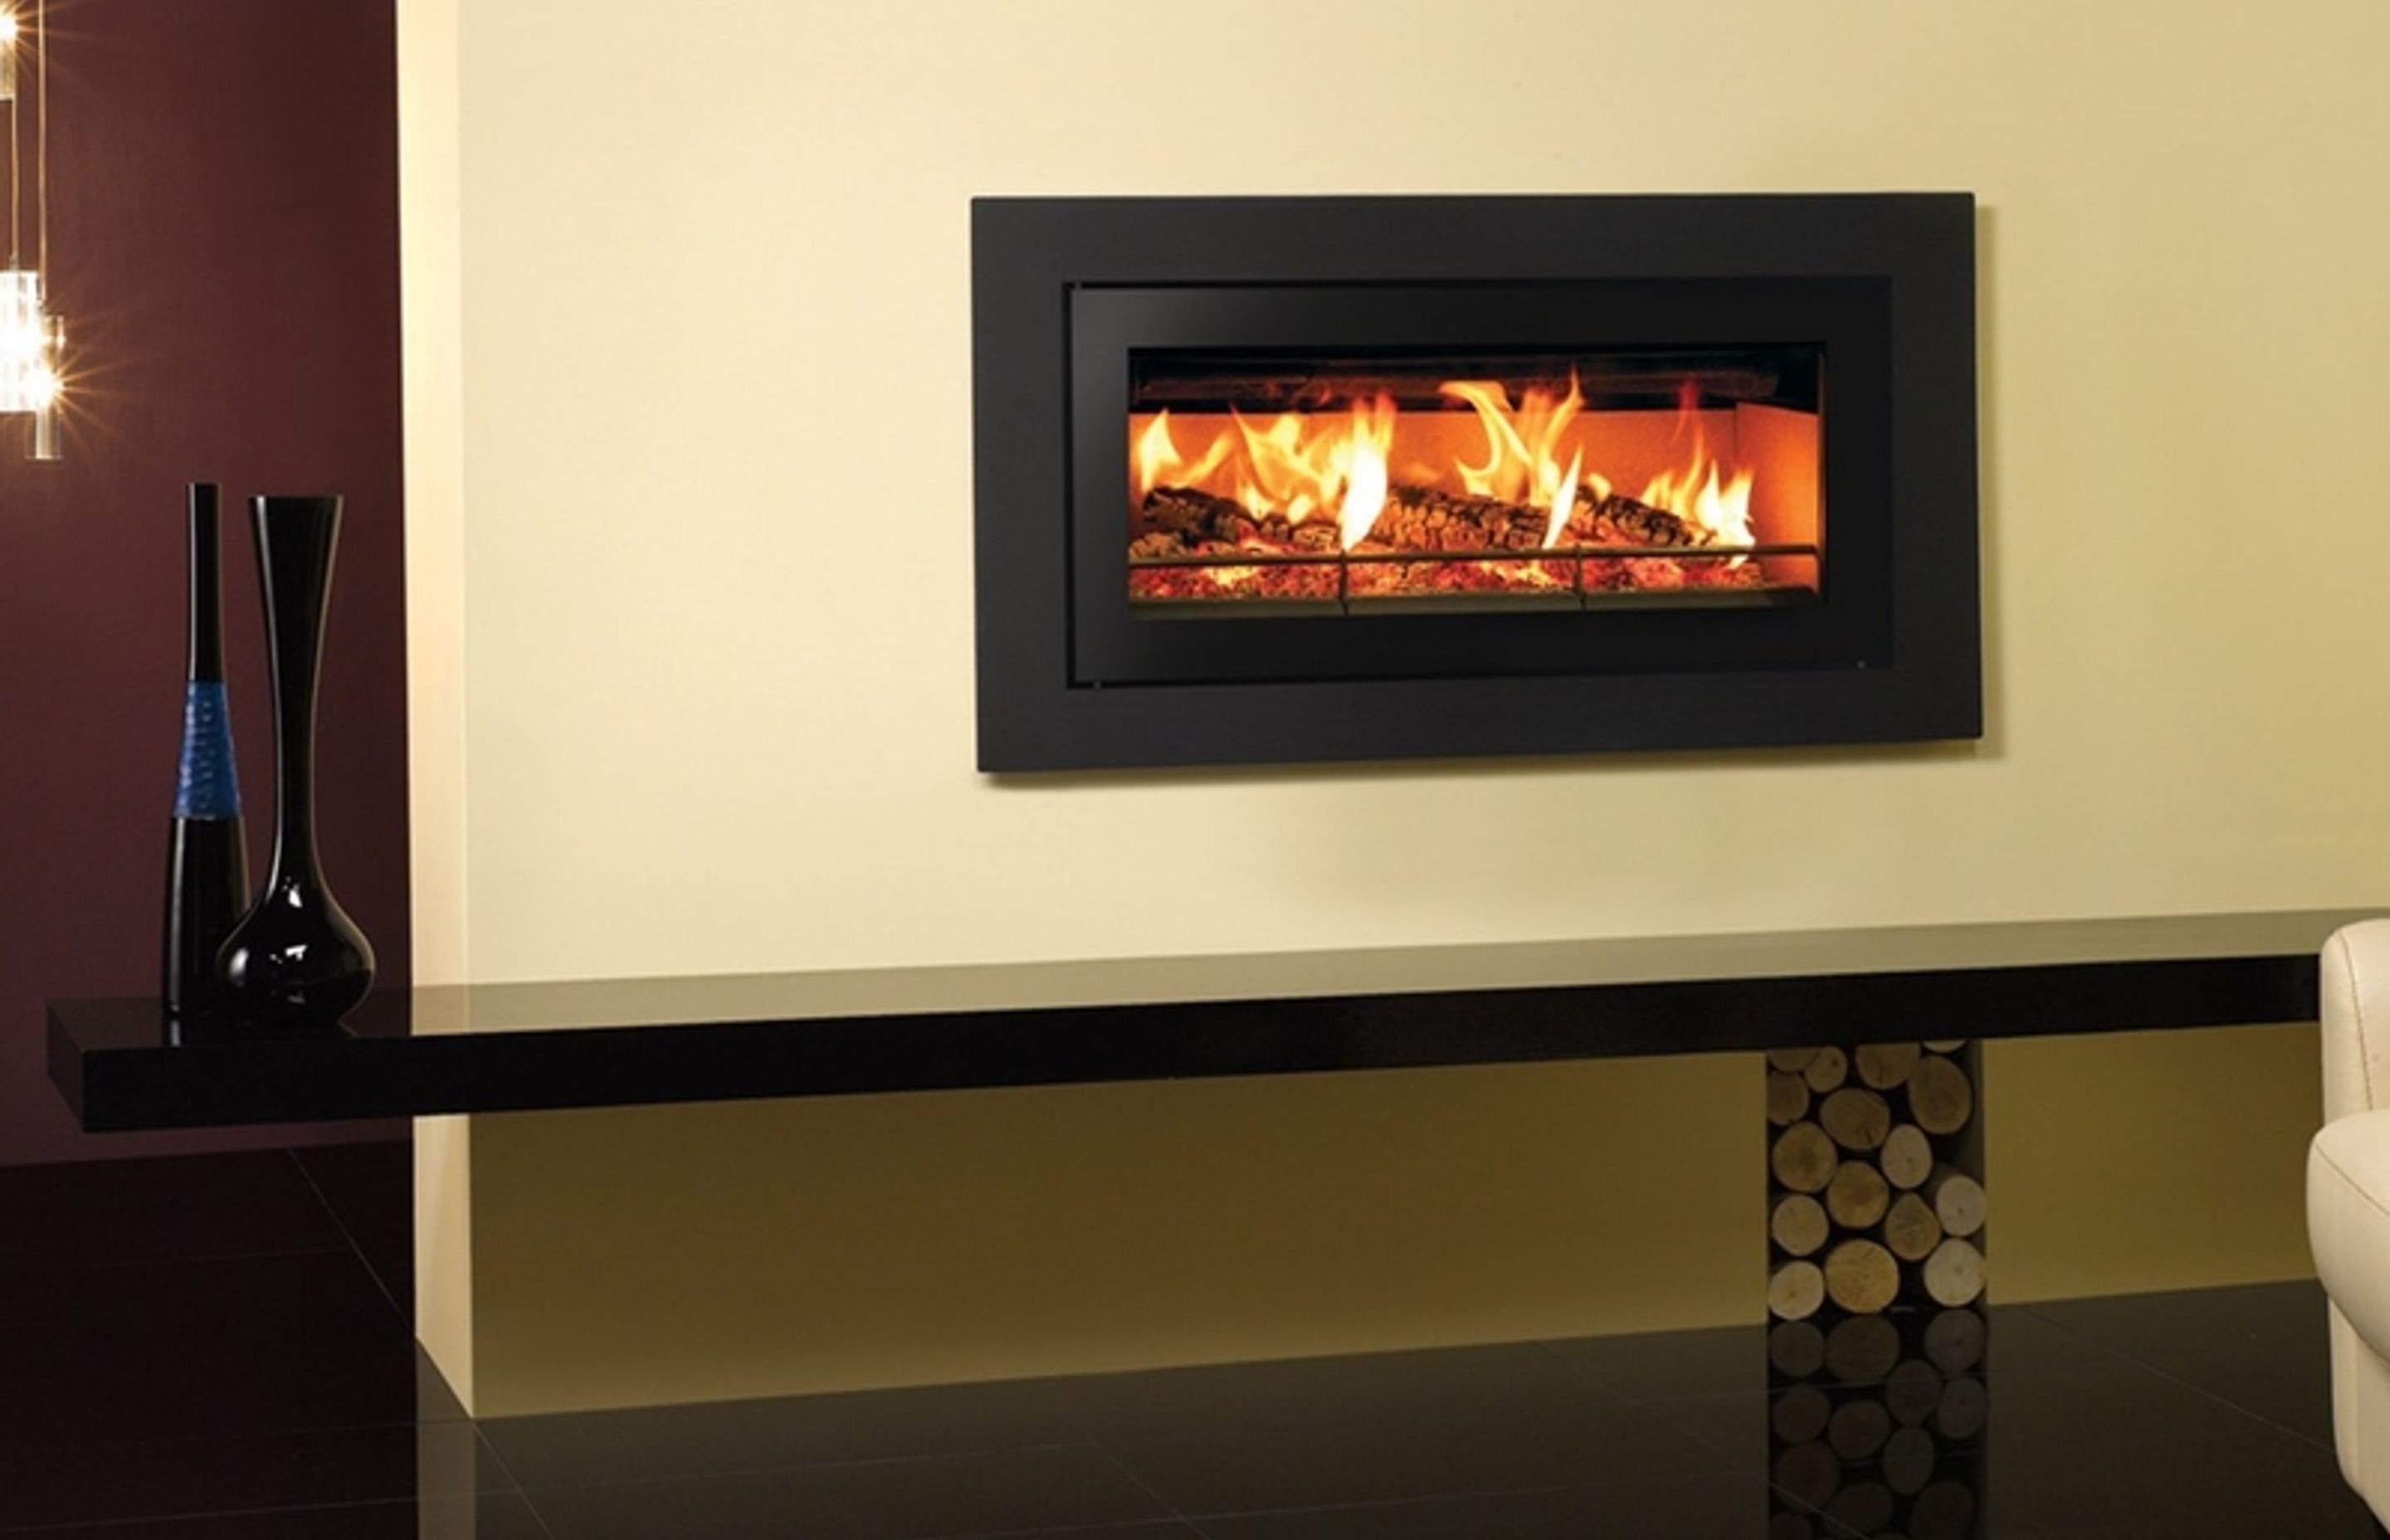 The Stovax Studio 2 fireplace works well as part of the Side by Side setup.